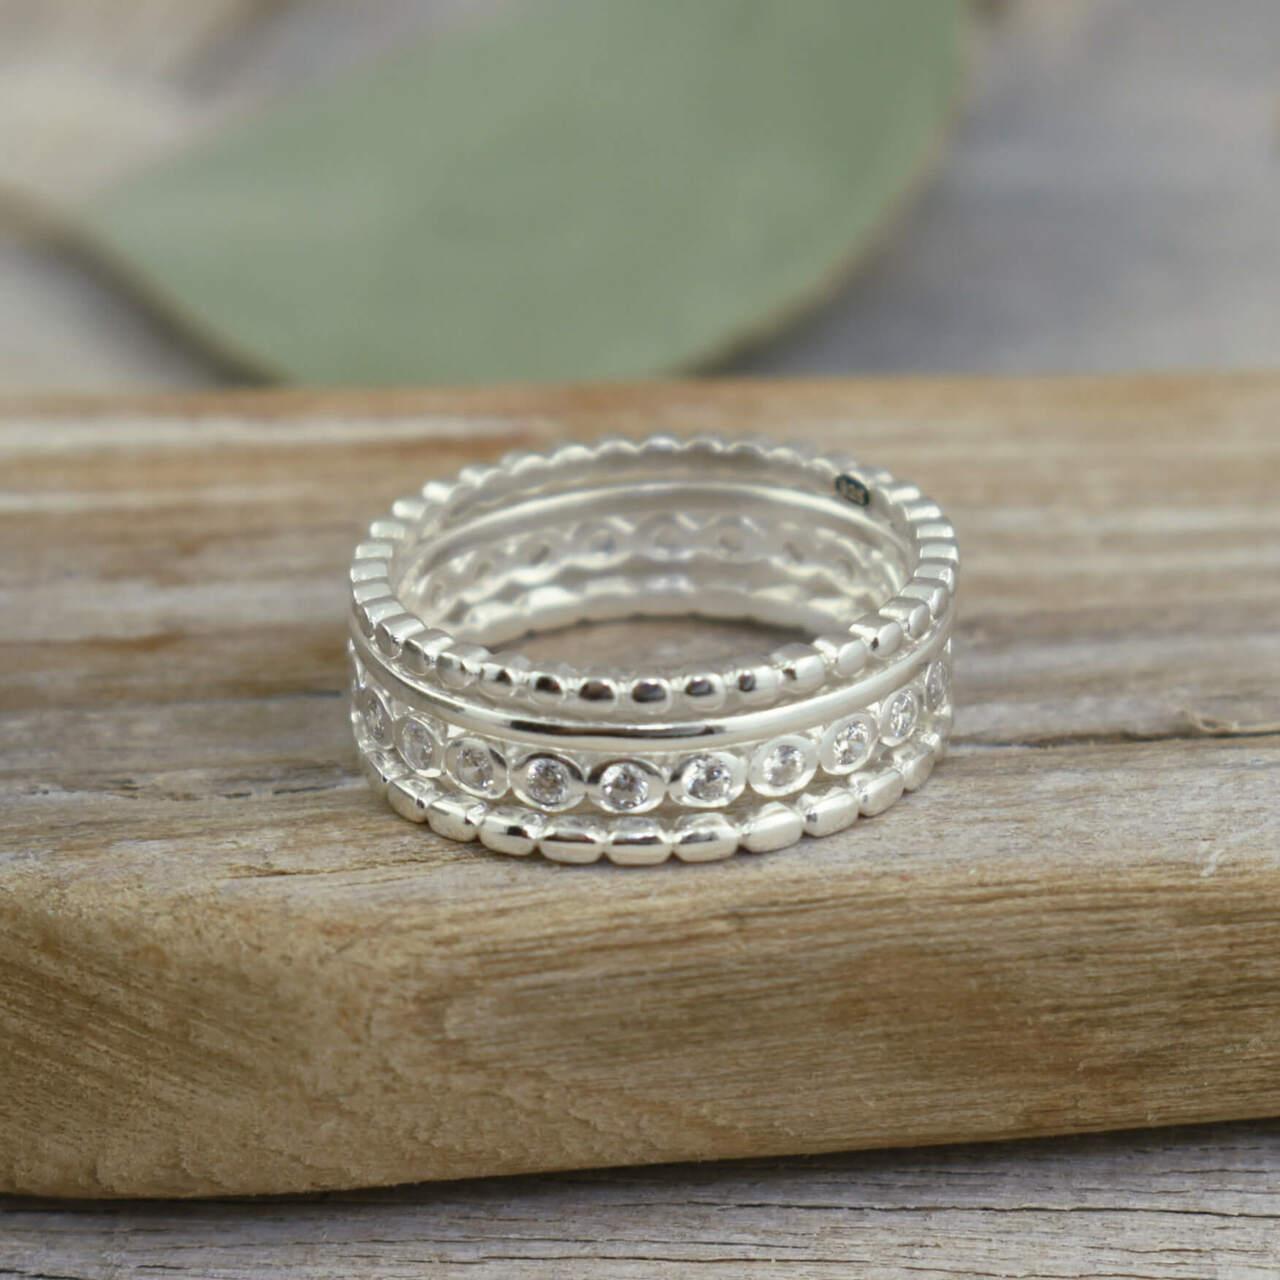 .925 sterling silver stack ring